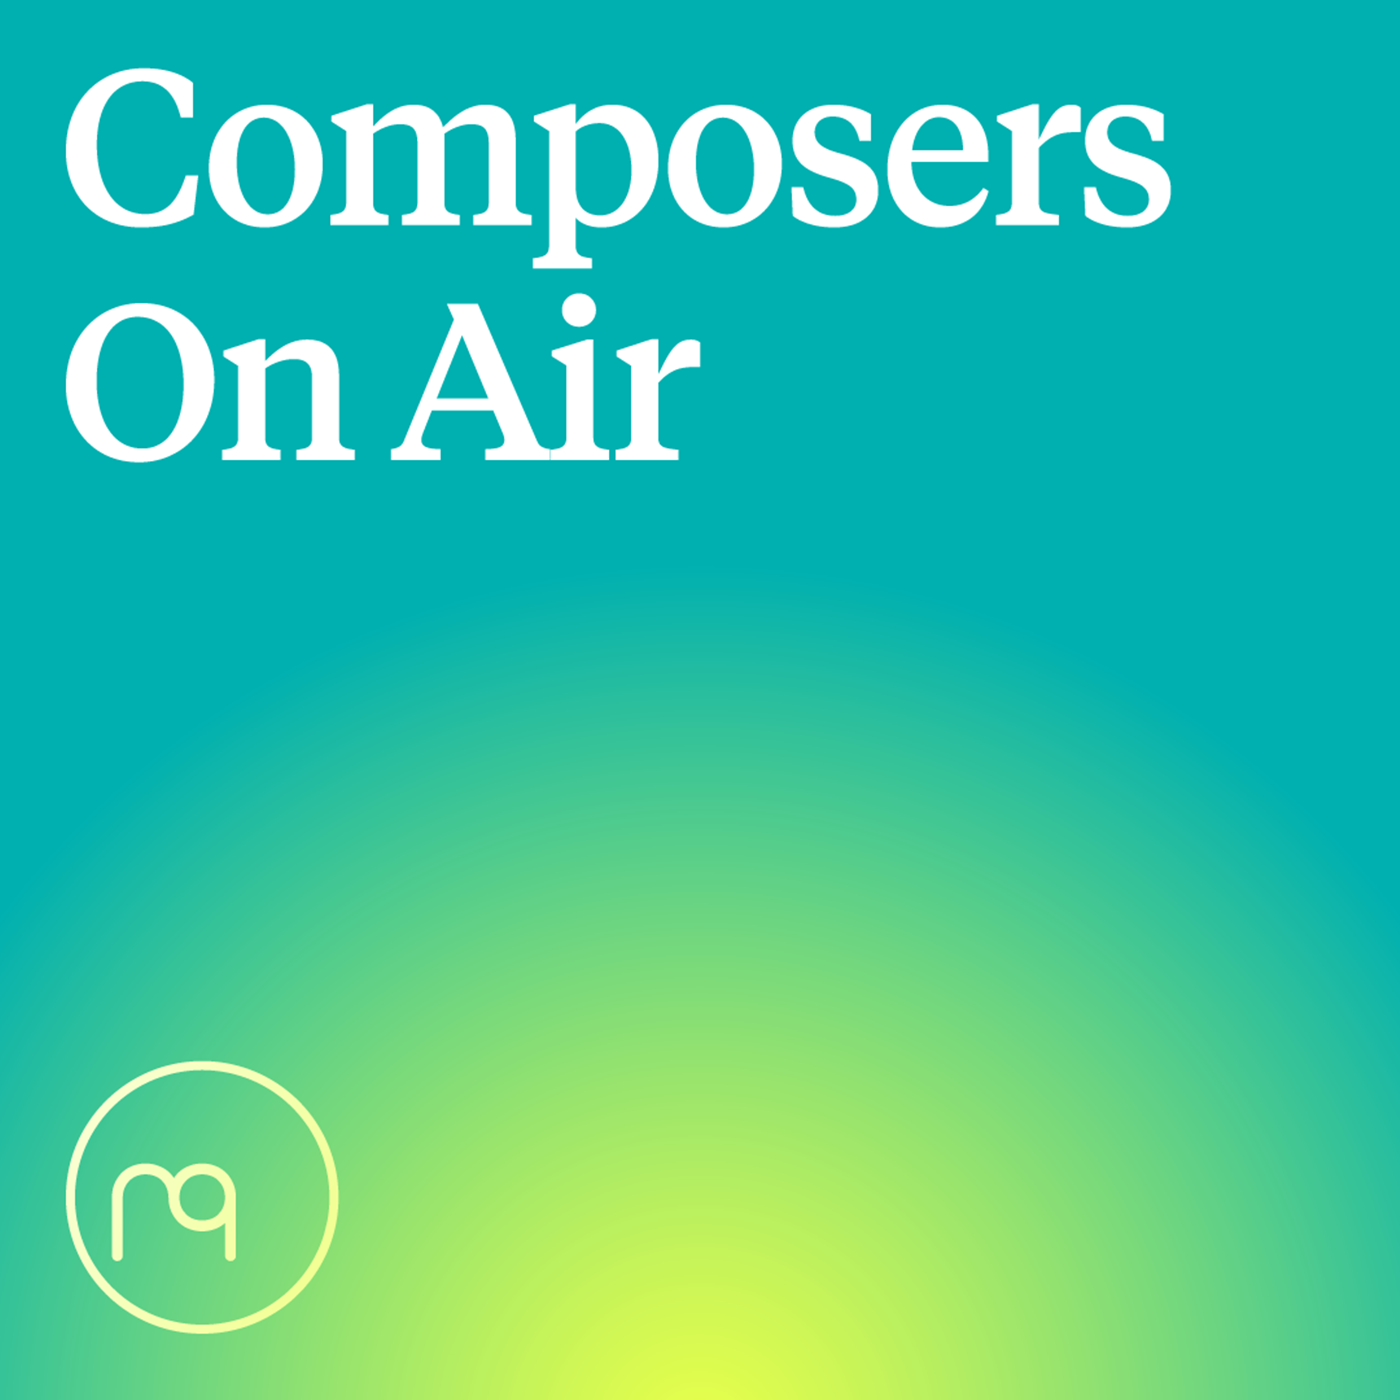 Composers On Air